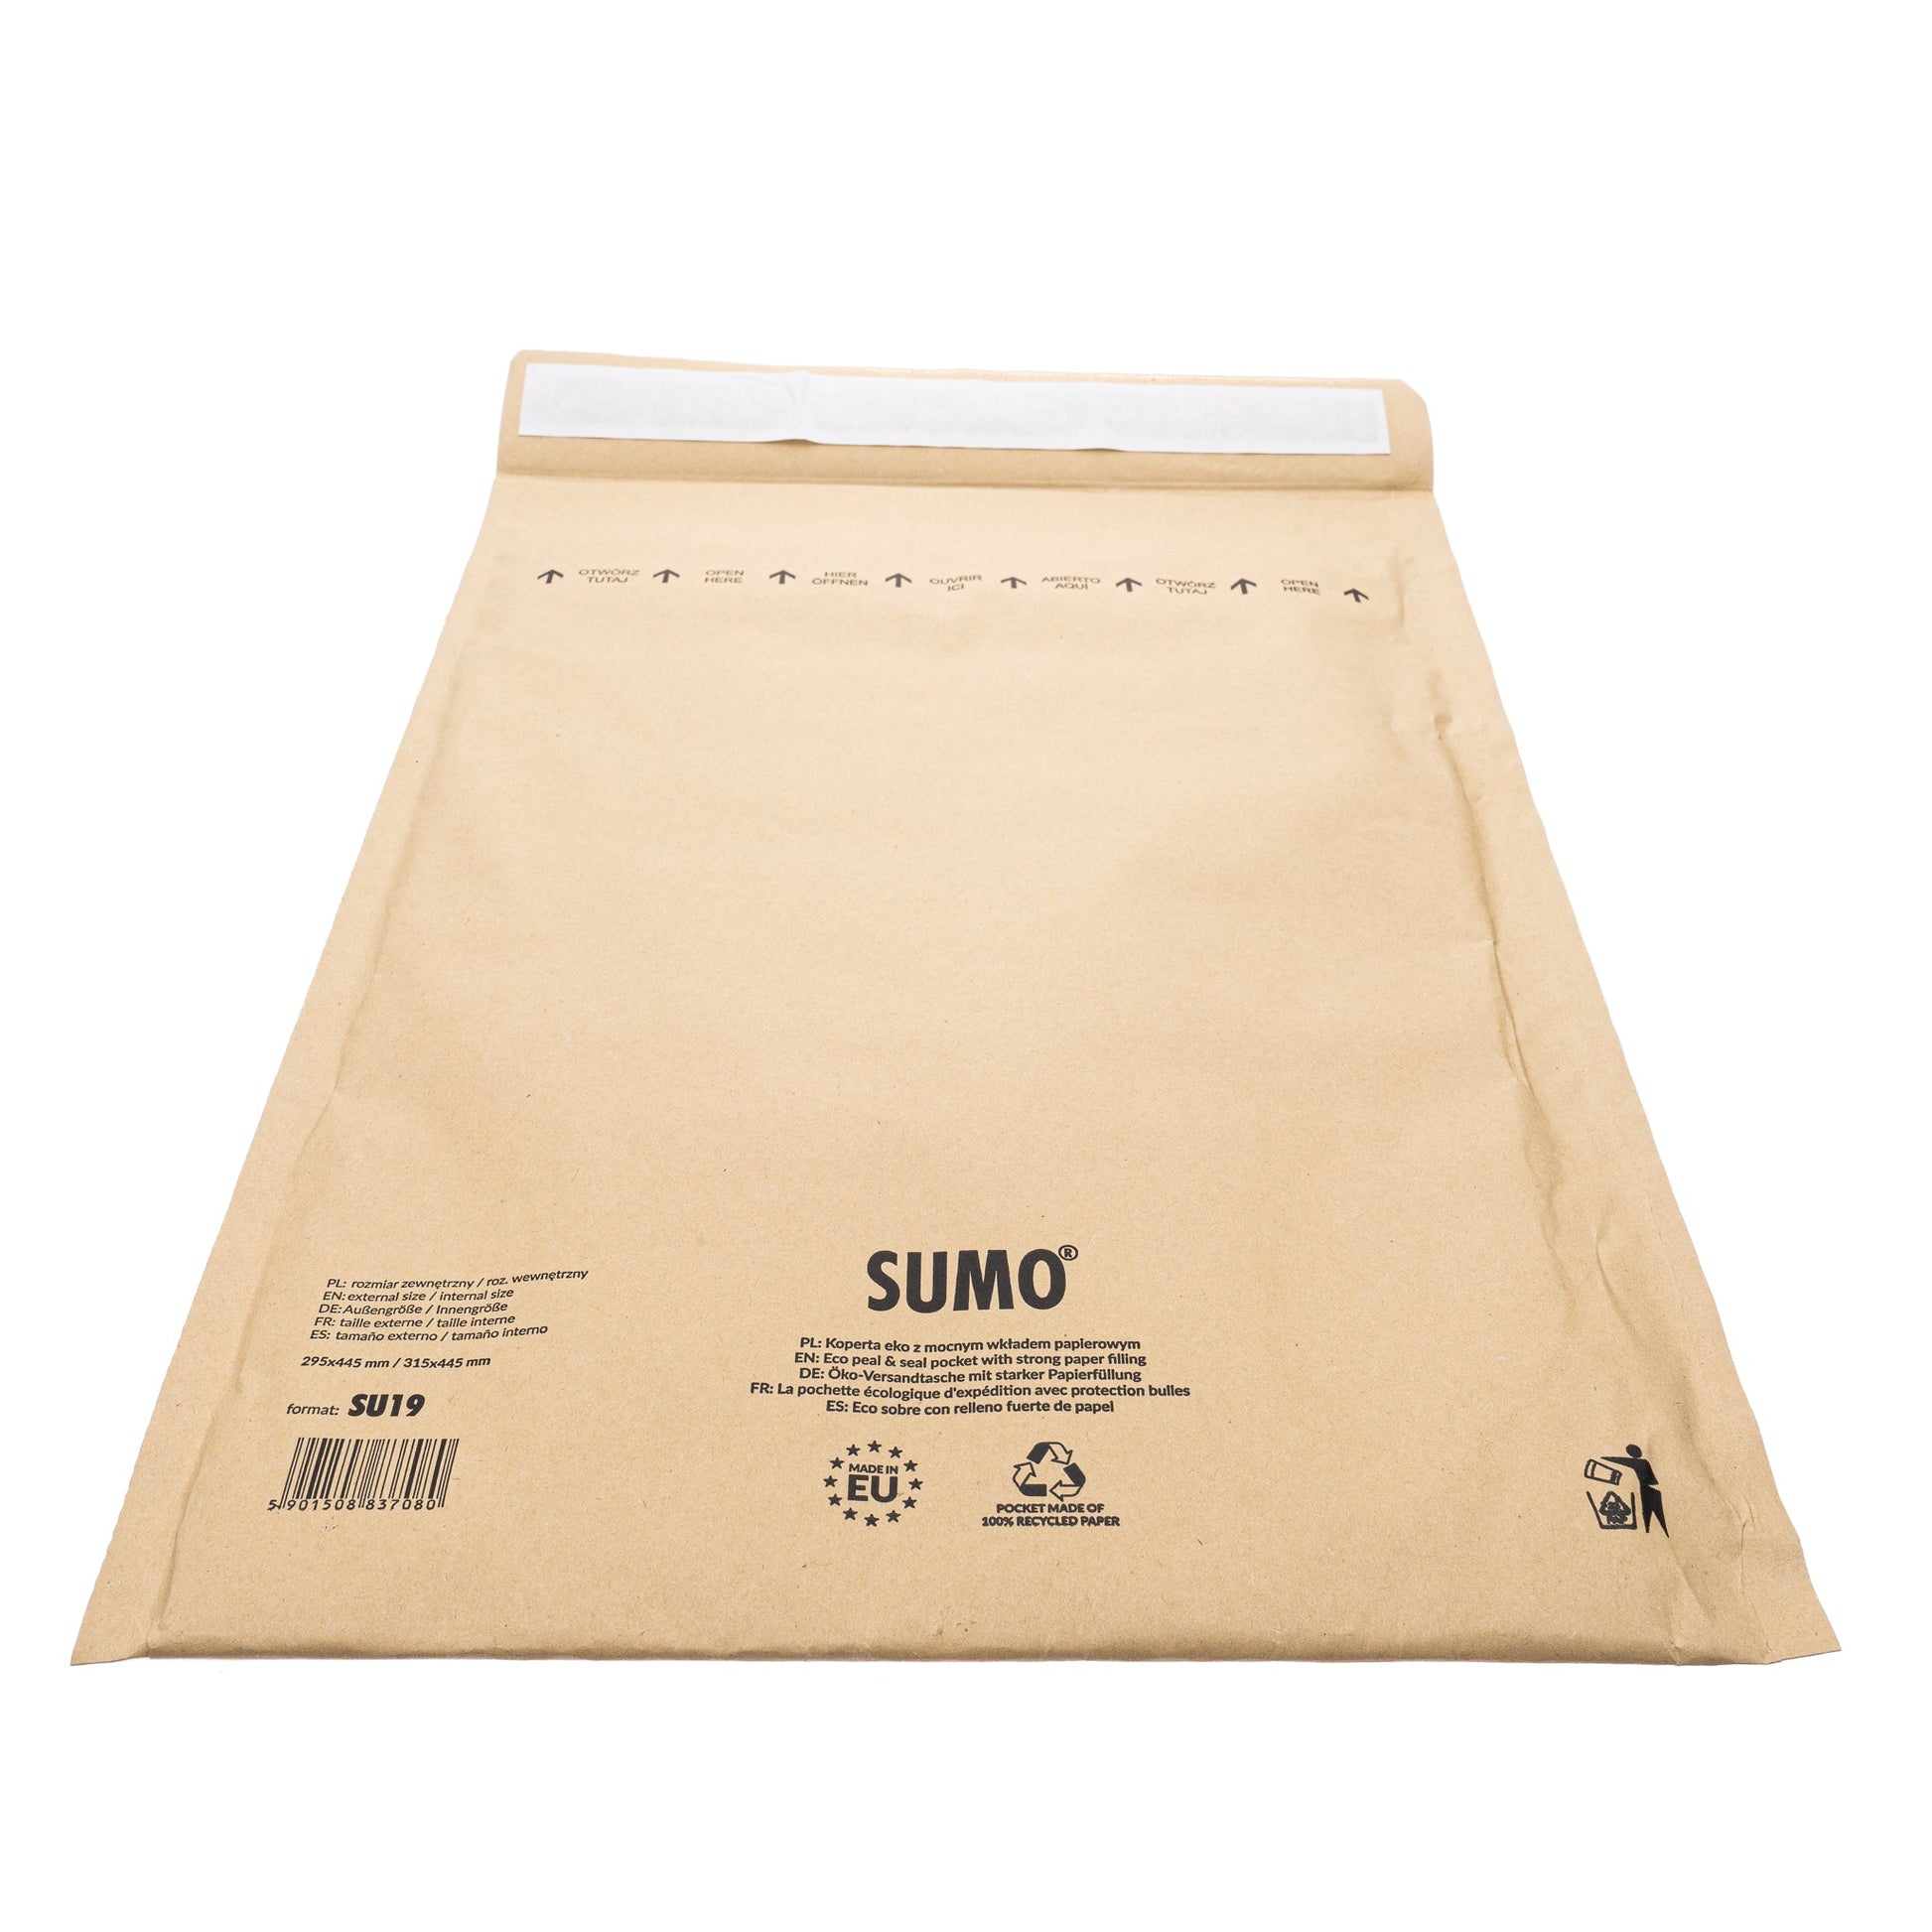 Protective paper mailers - the eco-friendly packaging solution. Made from brown kraft paper. FSC-certified product. 100% recycled paper.